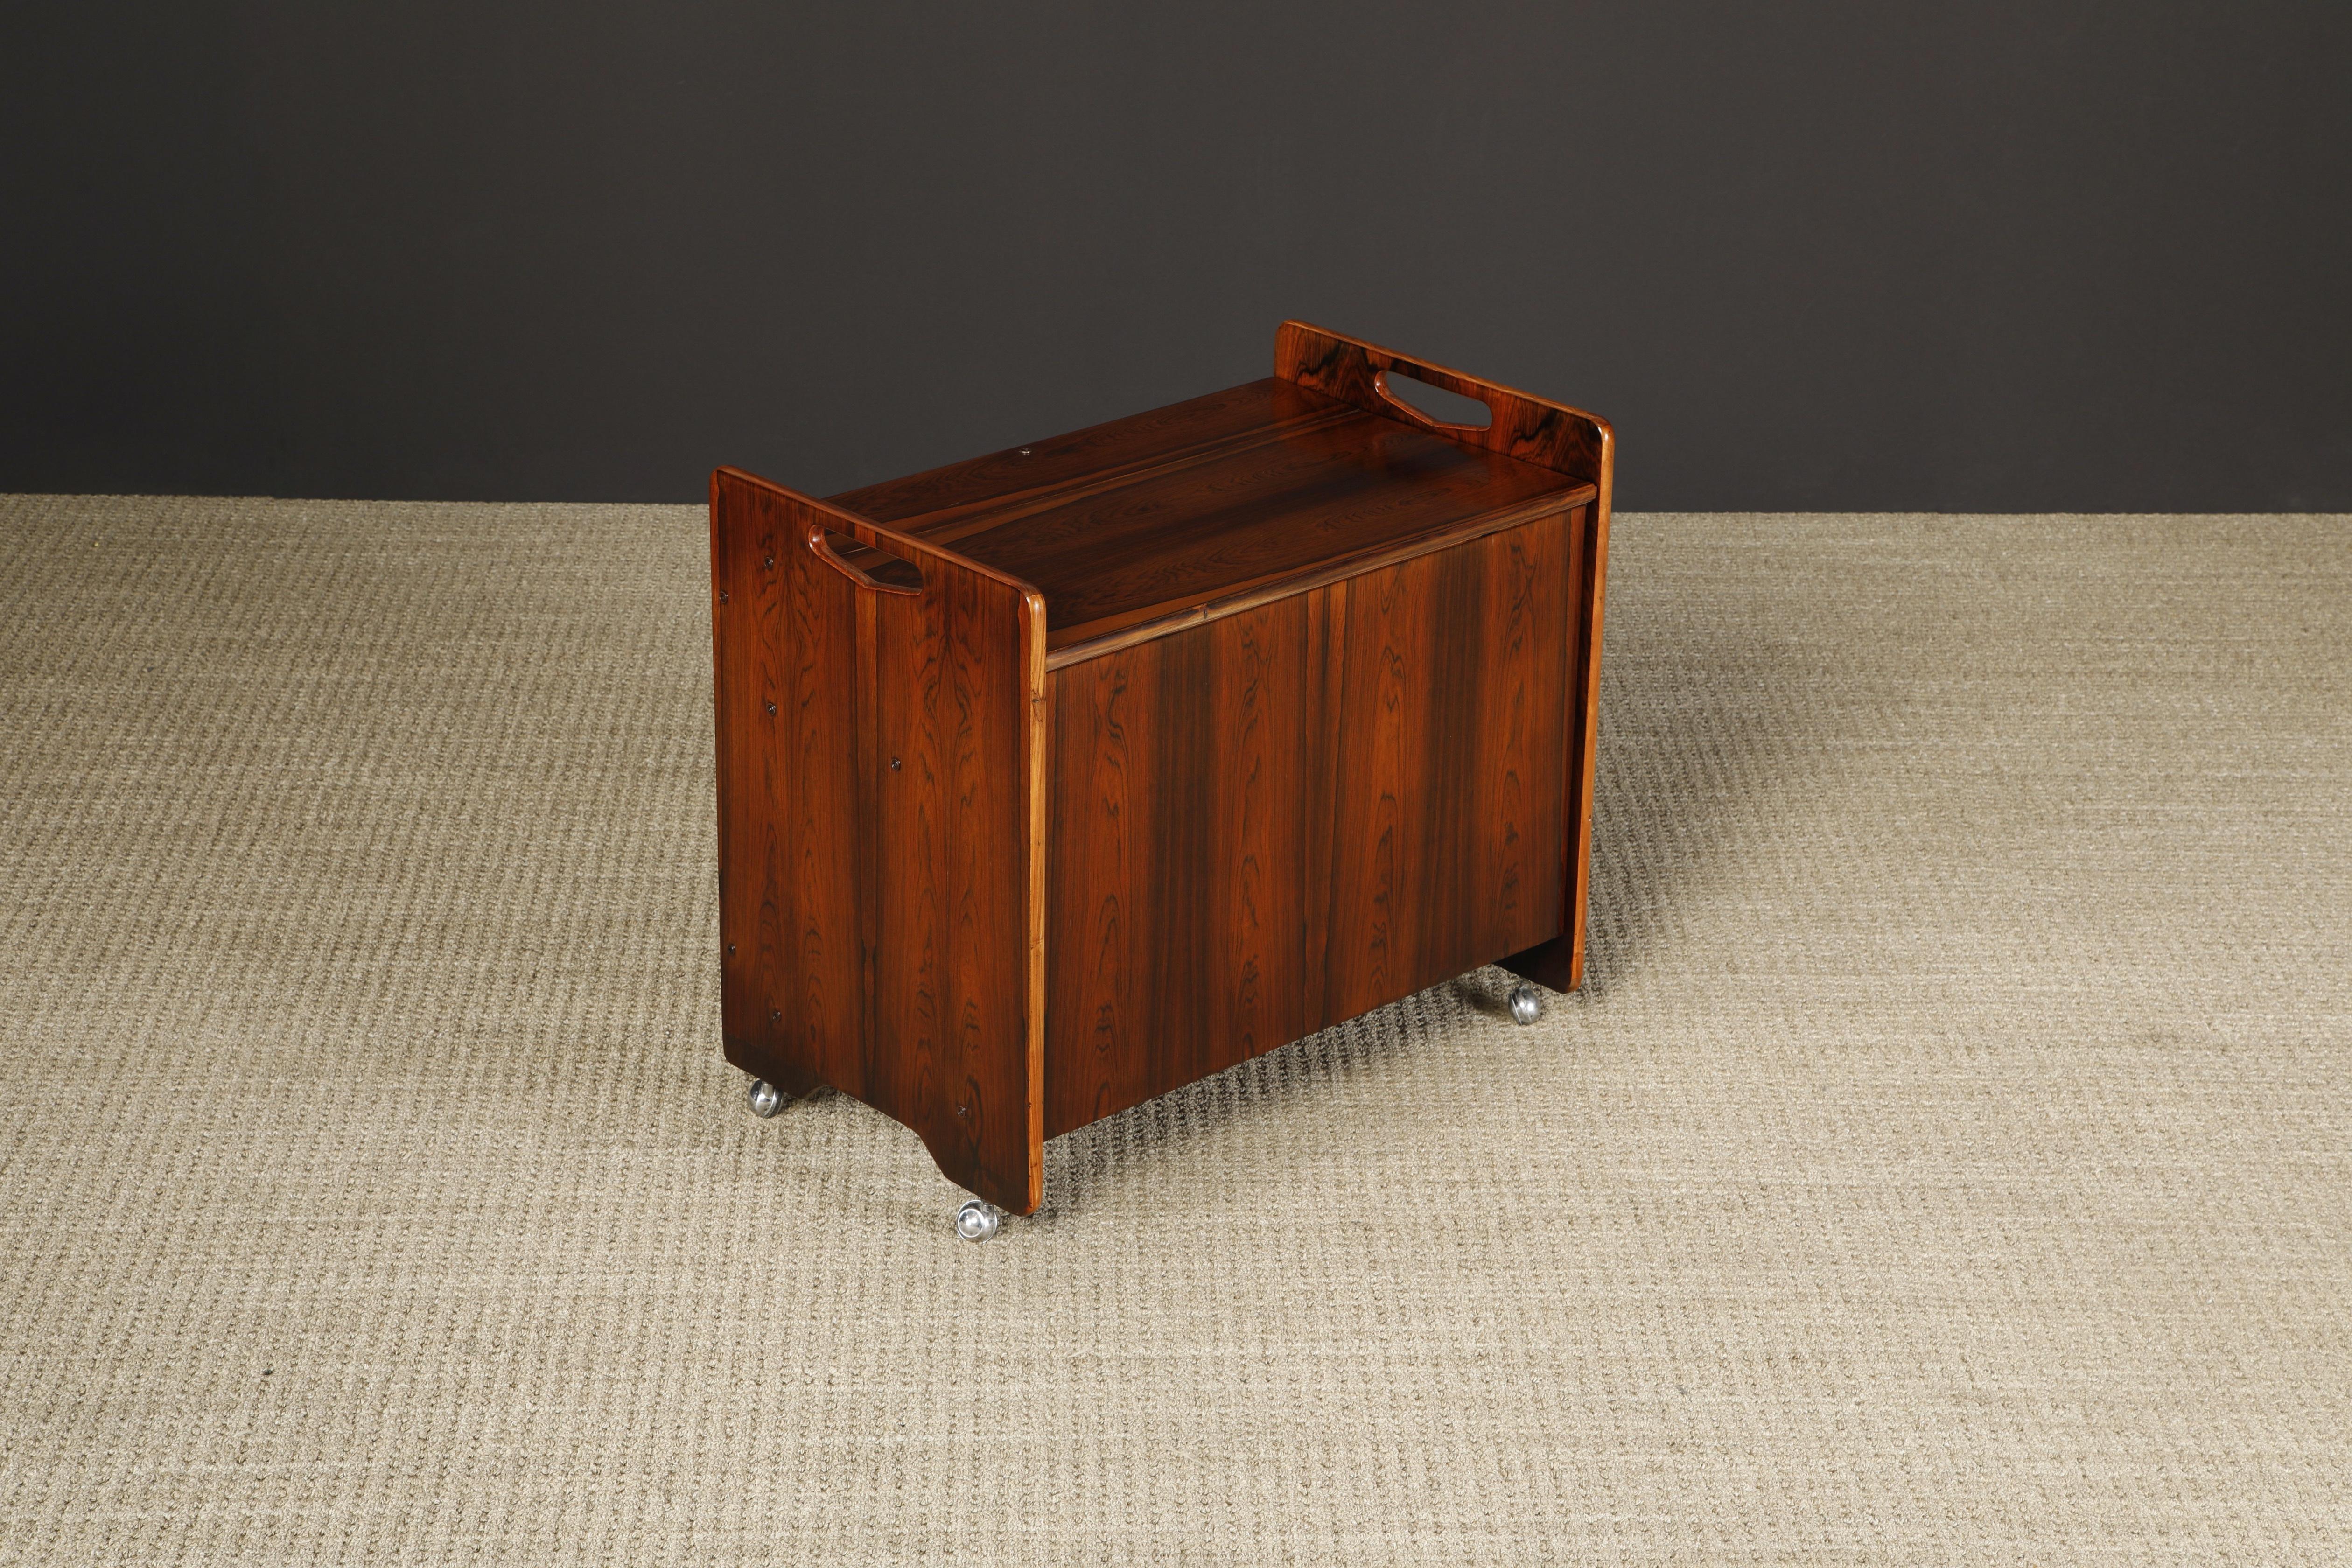 Formica Sergio Rodrigues Brazilian Rosewood Convertible Bar Cart, c 1960s Brazil For Sale